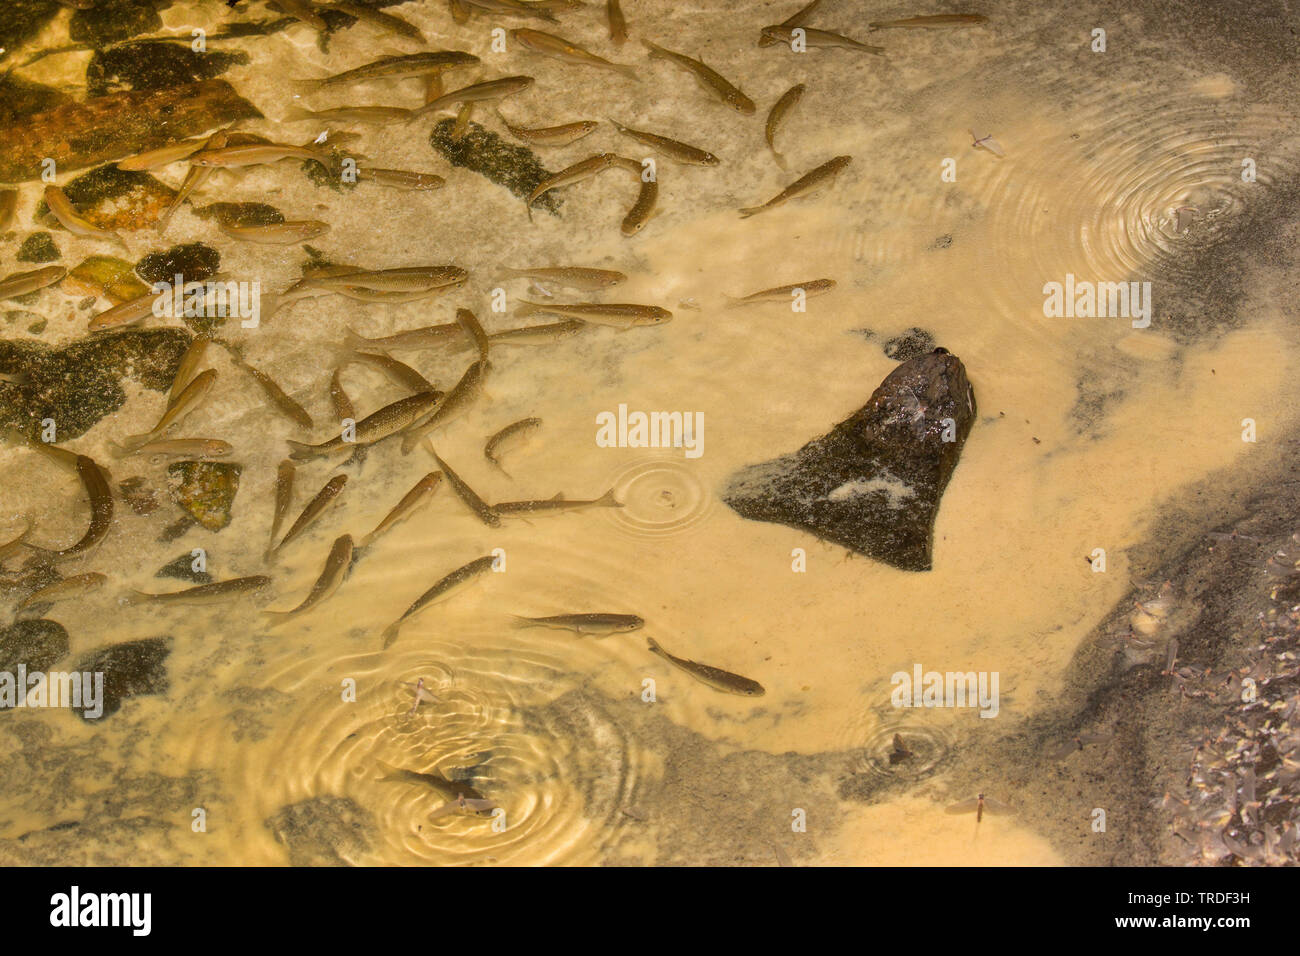 Virgin mayfly (Ephoron virgo, Polymitarcis virgo), whitefishes eating eggs from a riverbed that are overgrown with yellow eggs, Germany, Bavaria Stock Photo